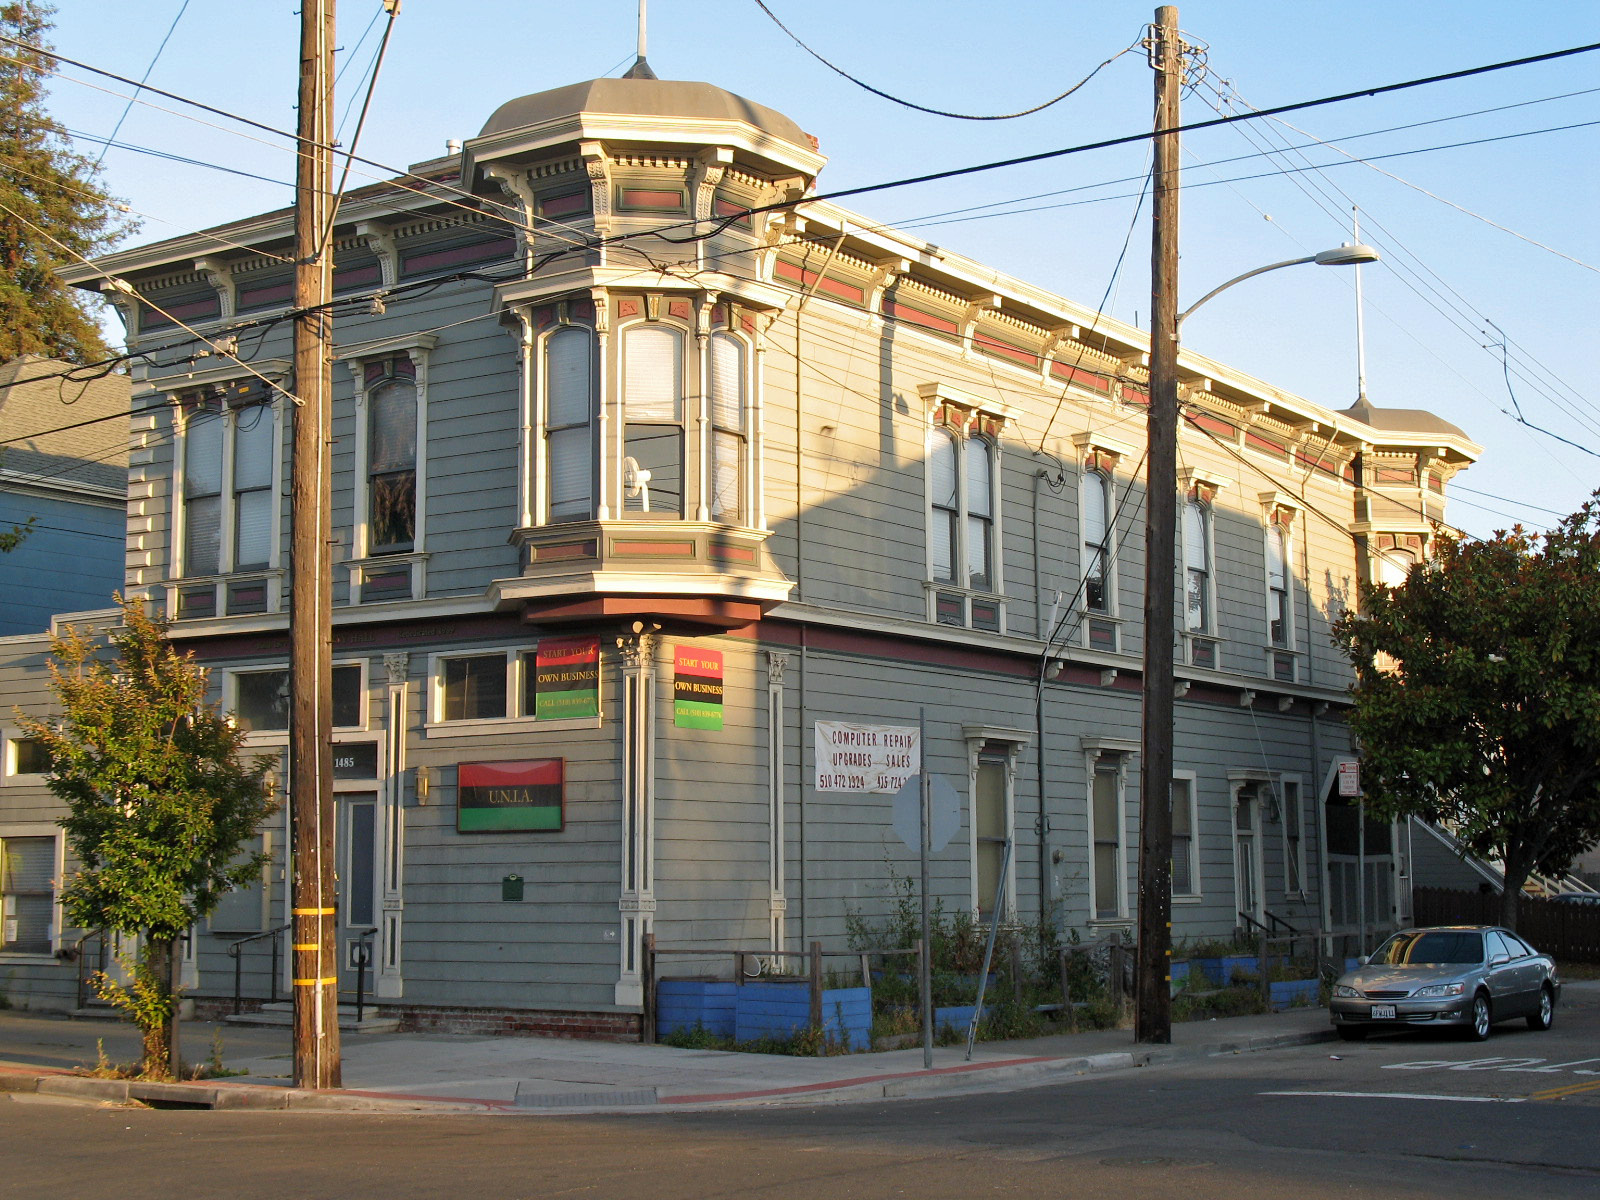 Oakland's Marcus Garvey Building: SAVED FROM CITIBANK FORECLOSURE